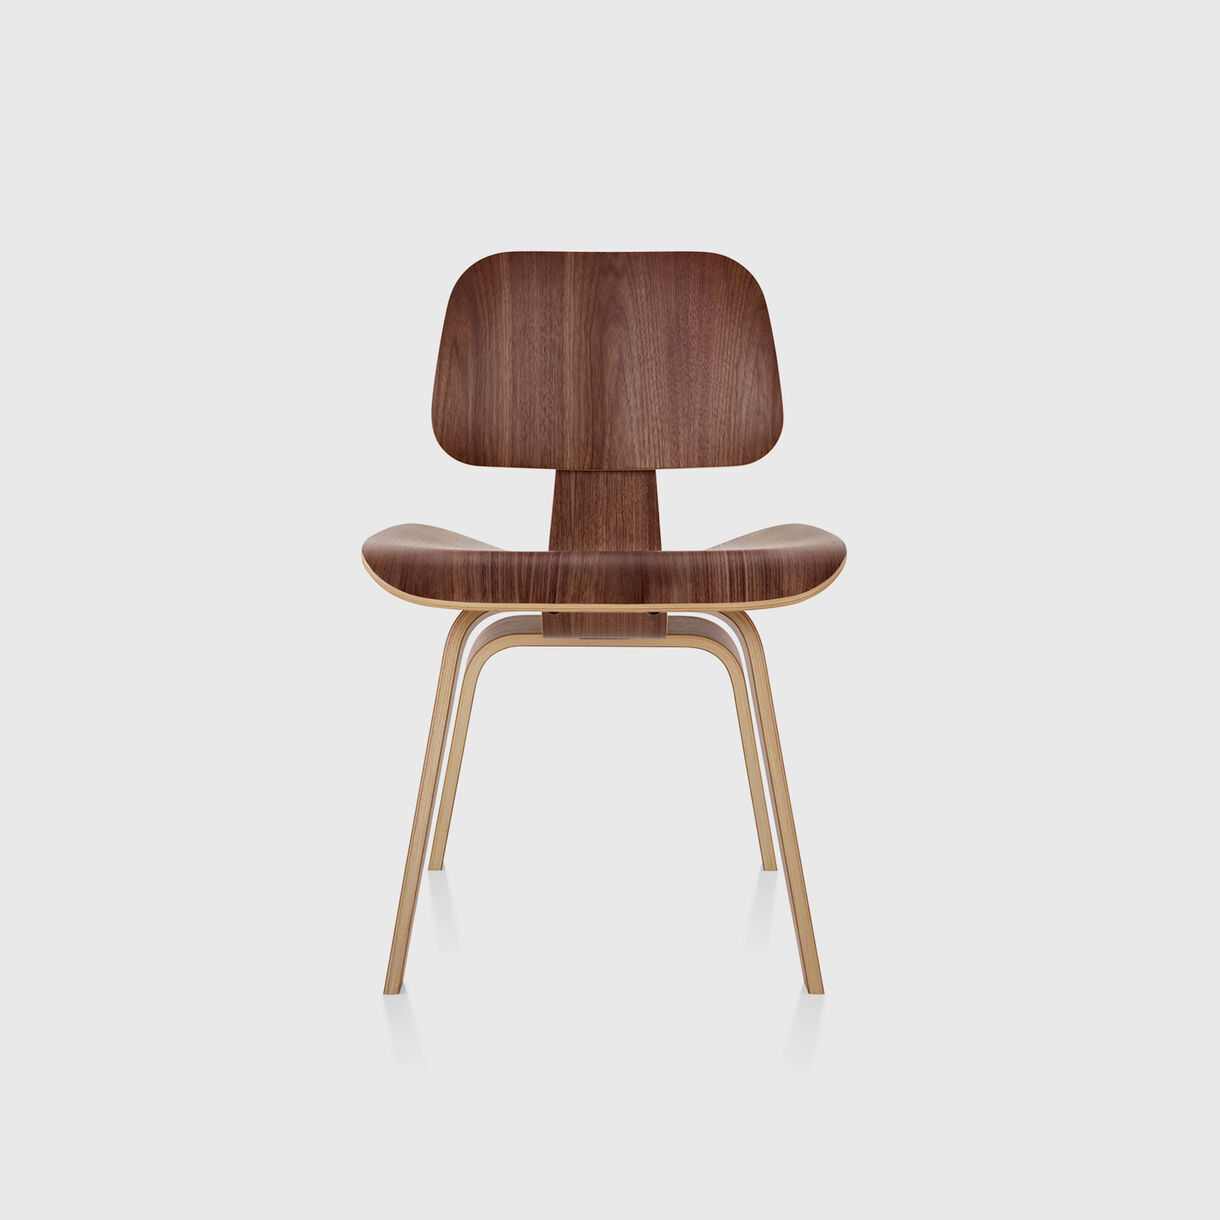 Eames Moulded Plywood Dining Chair, Walnut